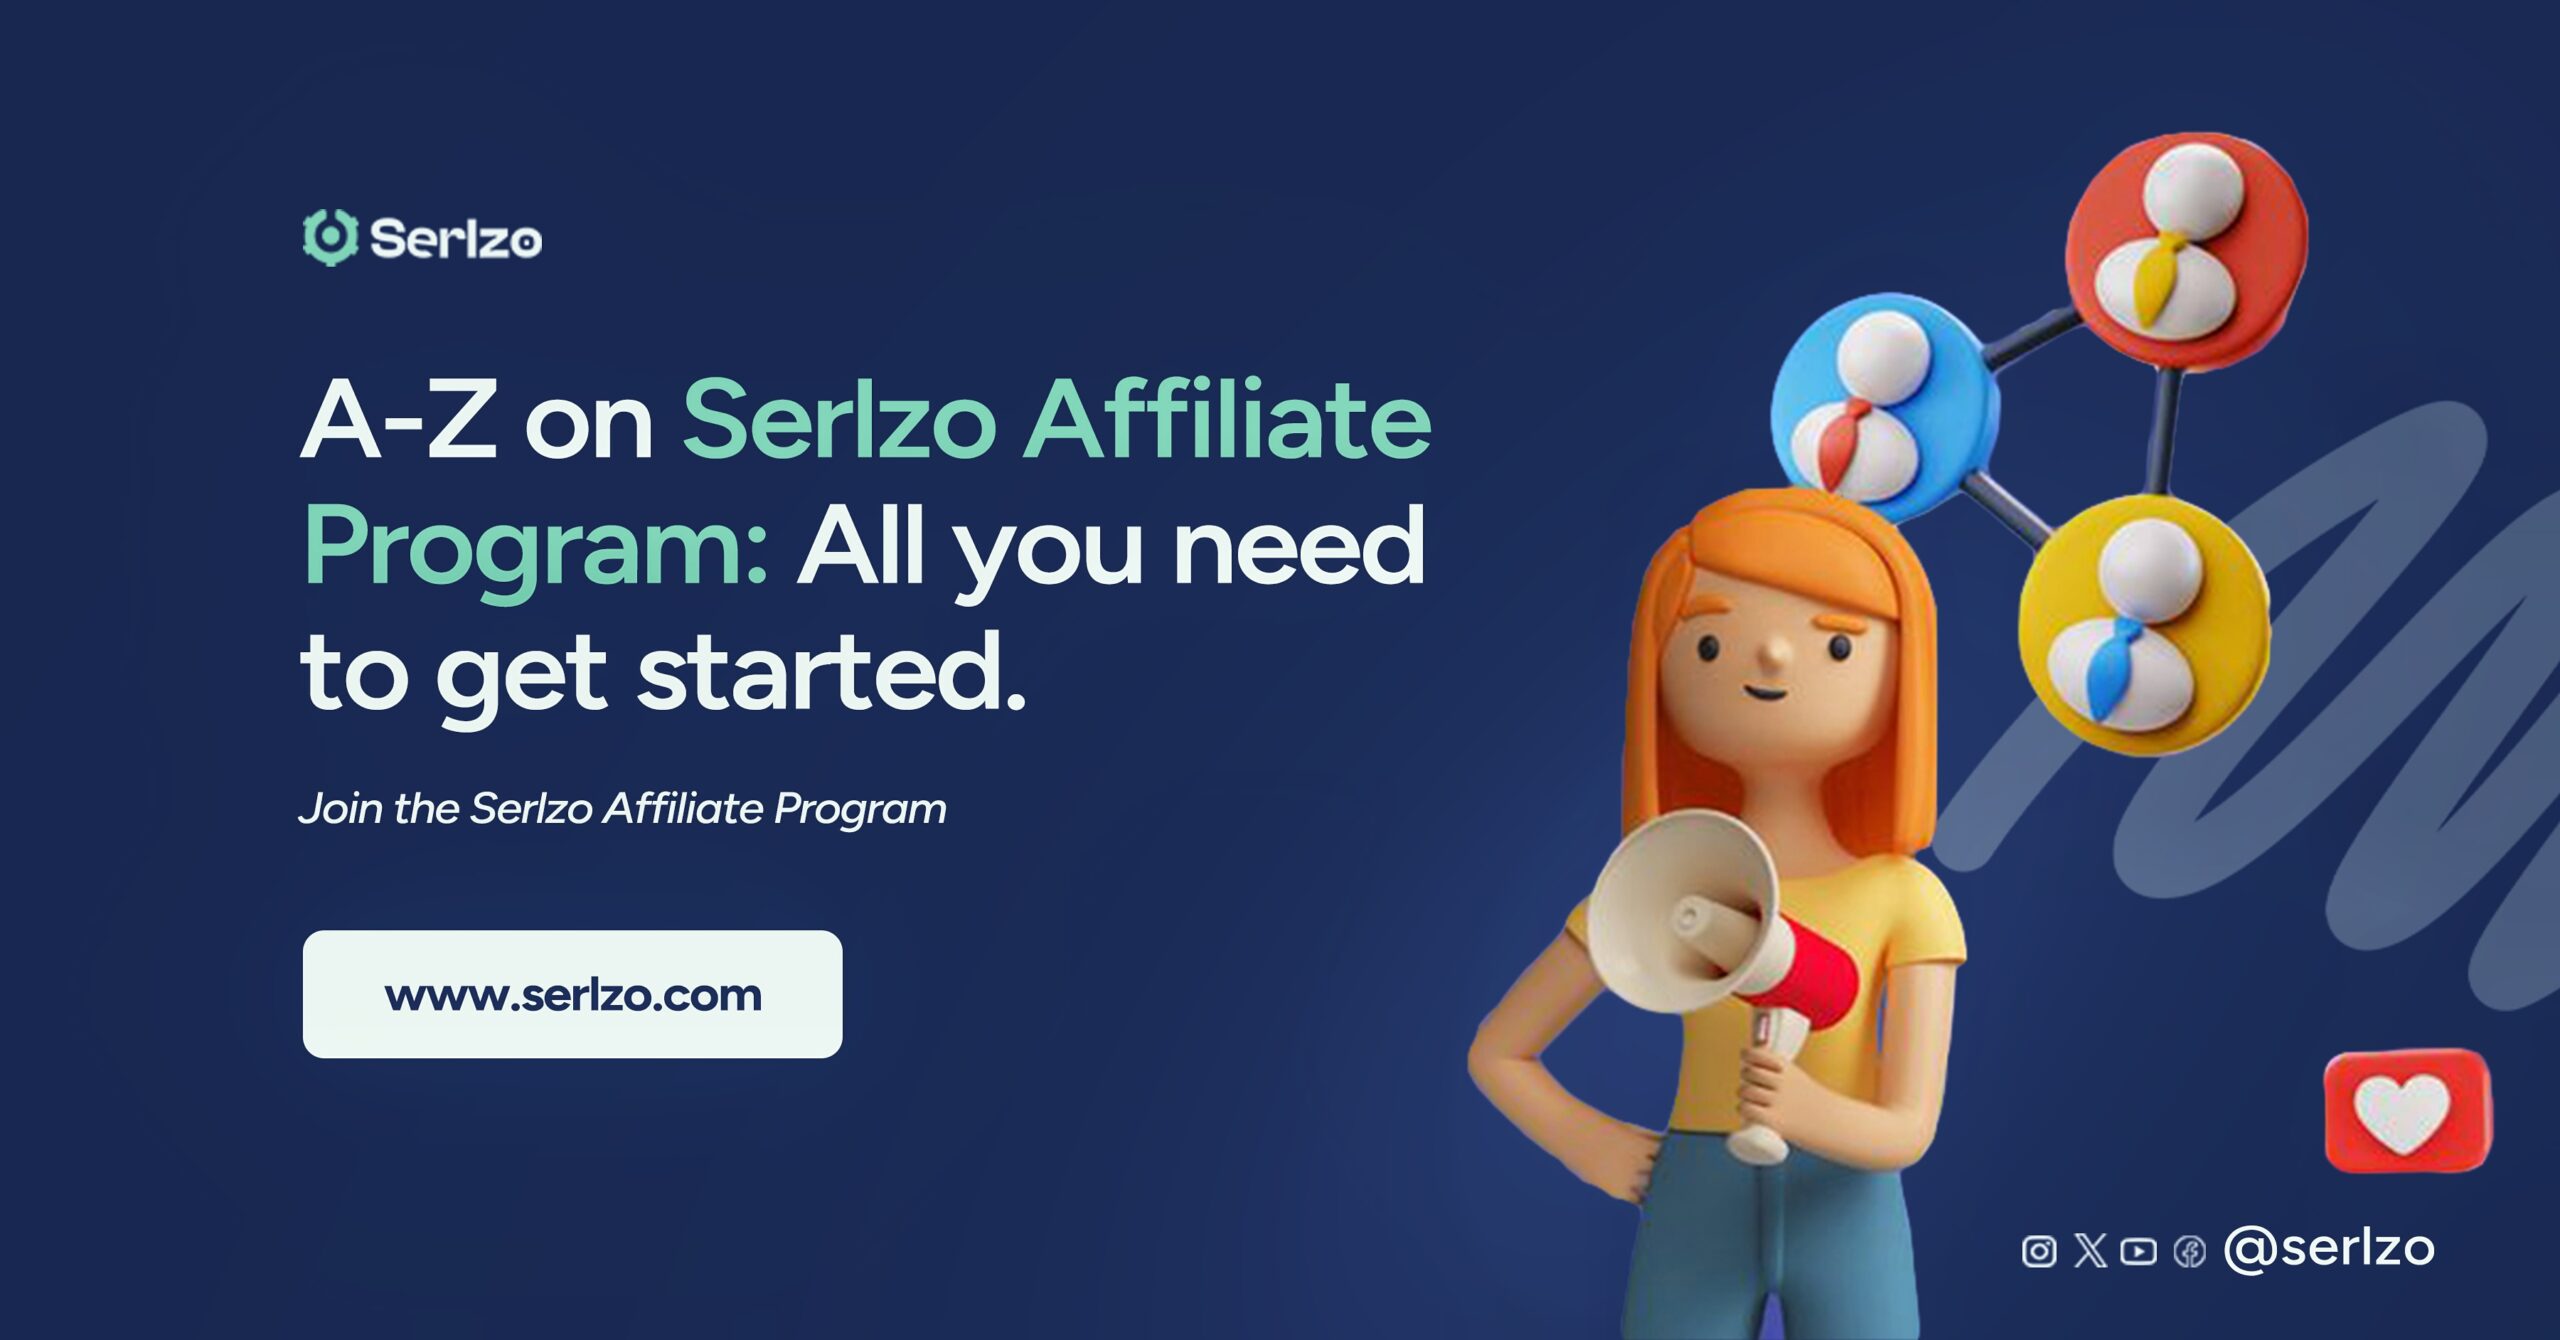 A-Z on Serlzo Affiliate Program: All you need to get started